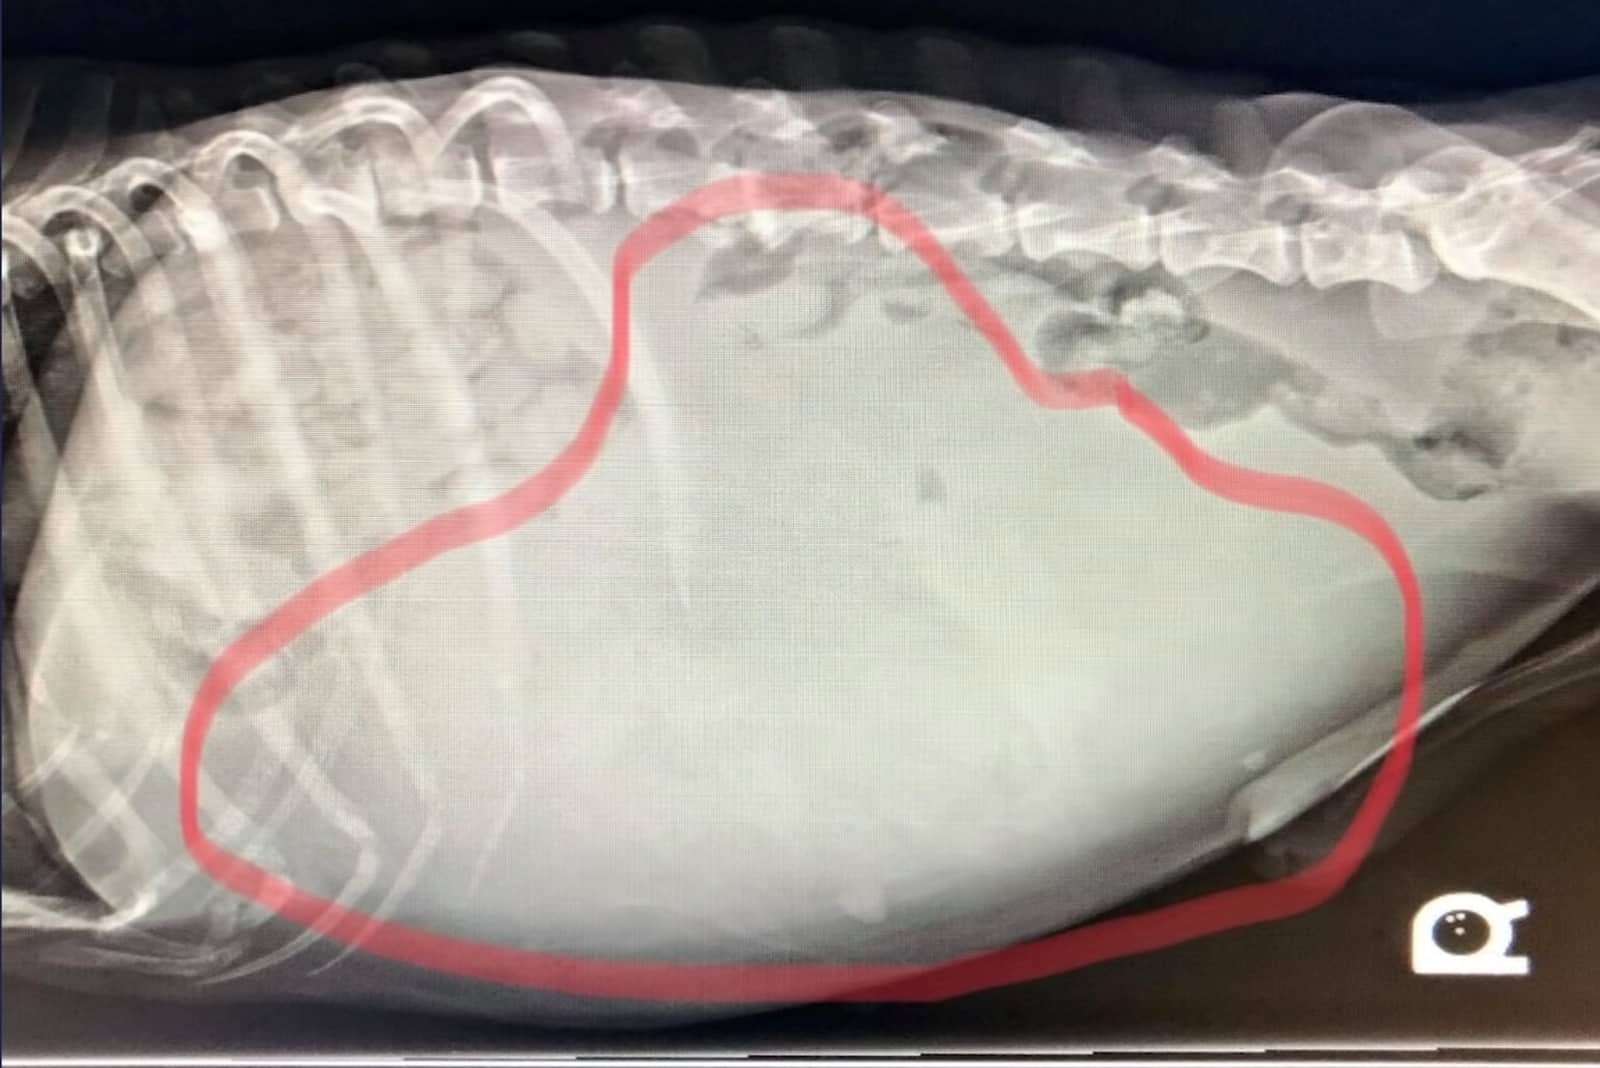 X-ray of the 7-pound tumor Holden was diagnosed with.